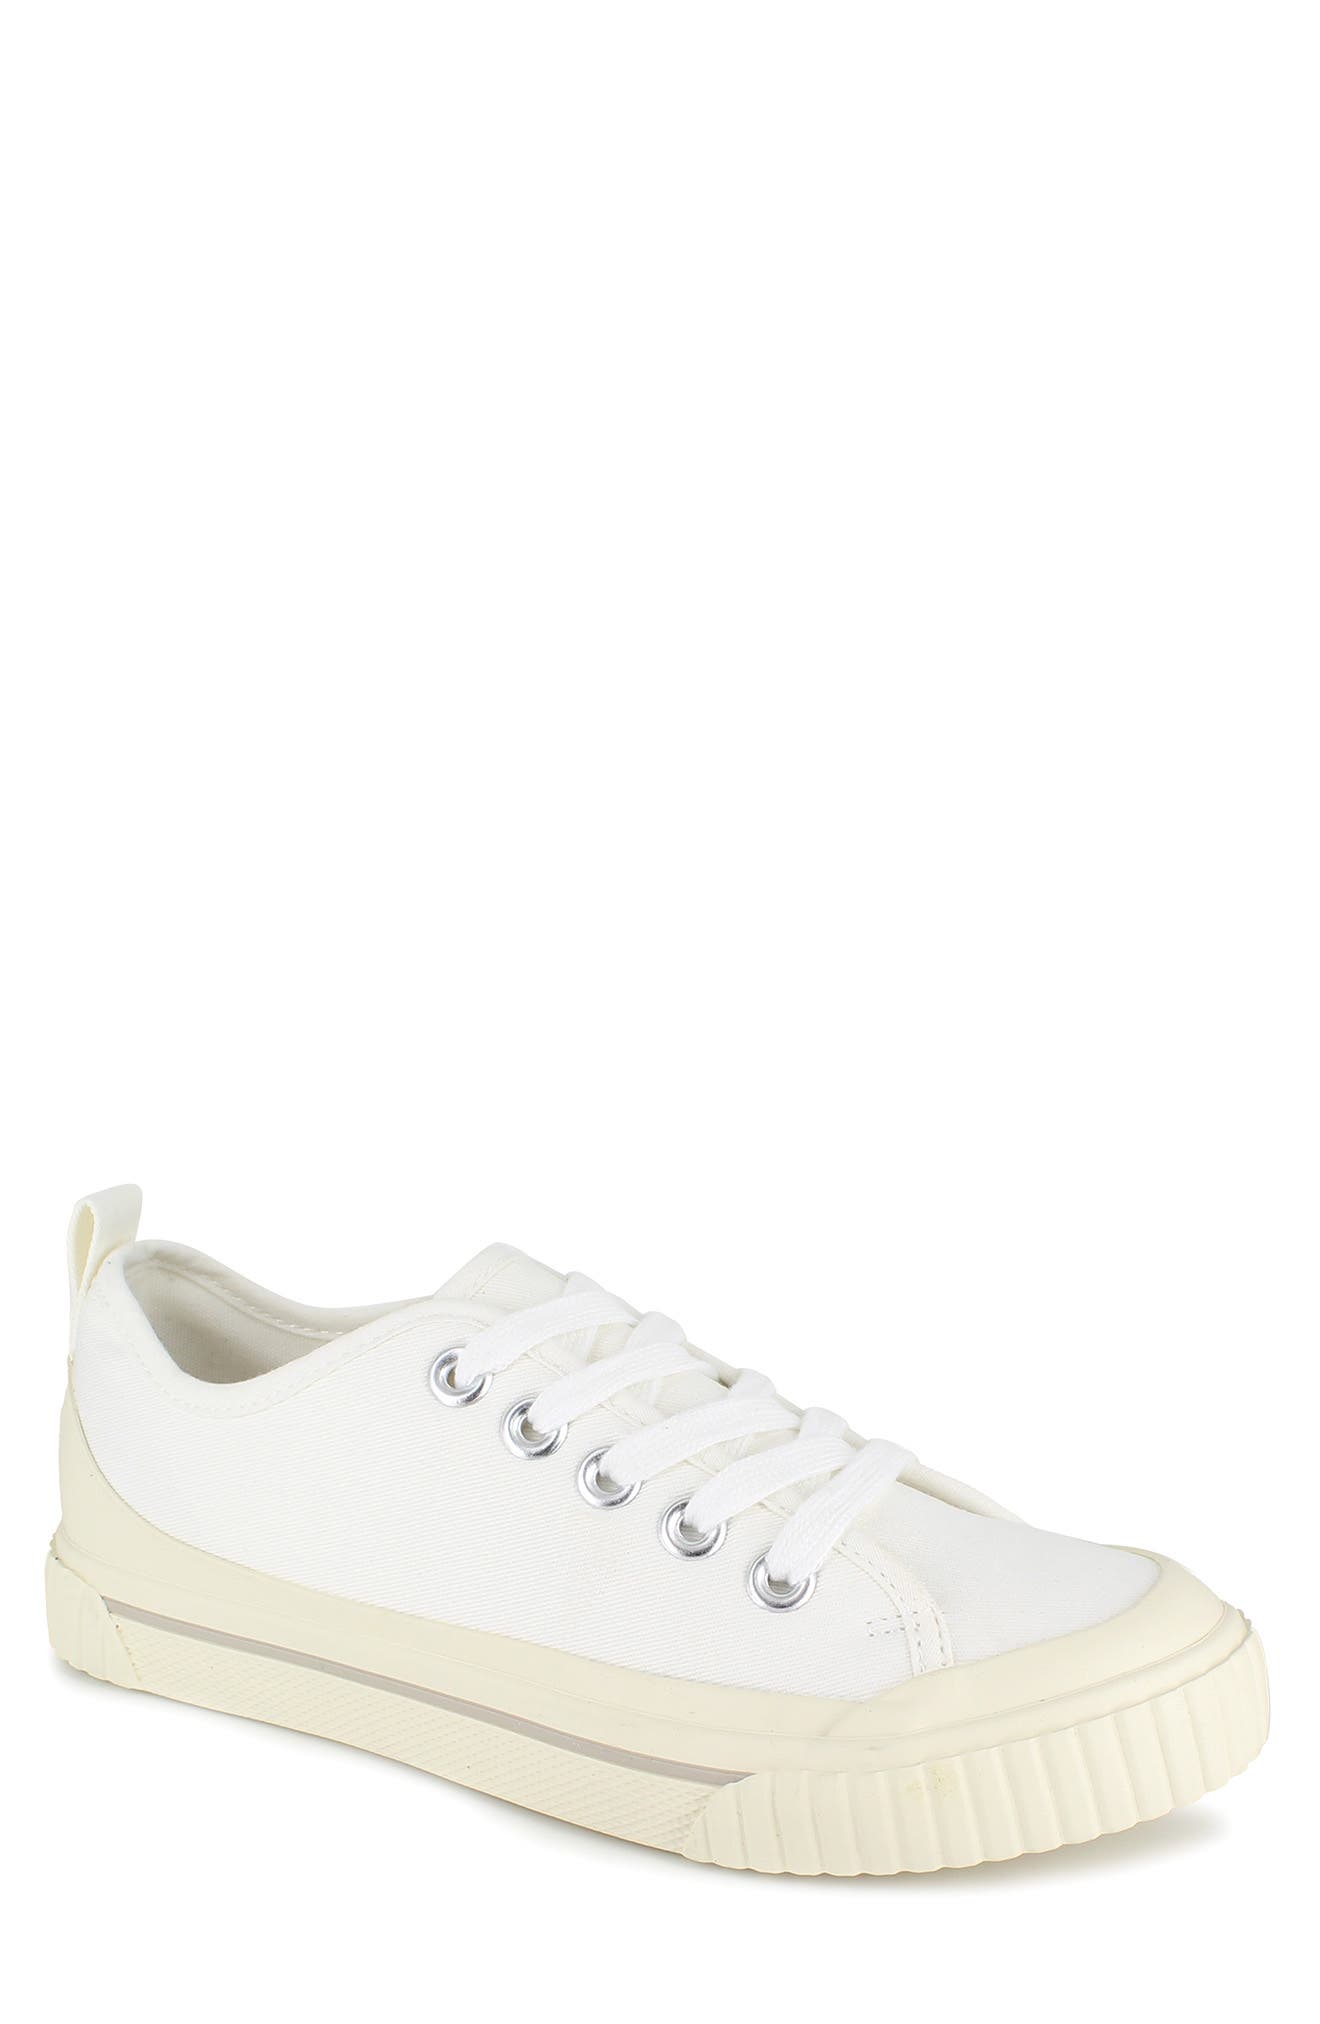 Esprit Lucy Low Top Sneaker In Off White | ModeSens